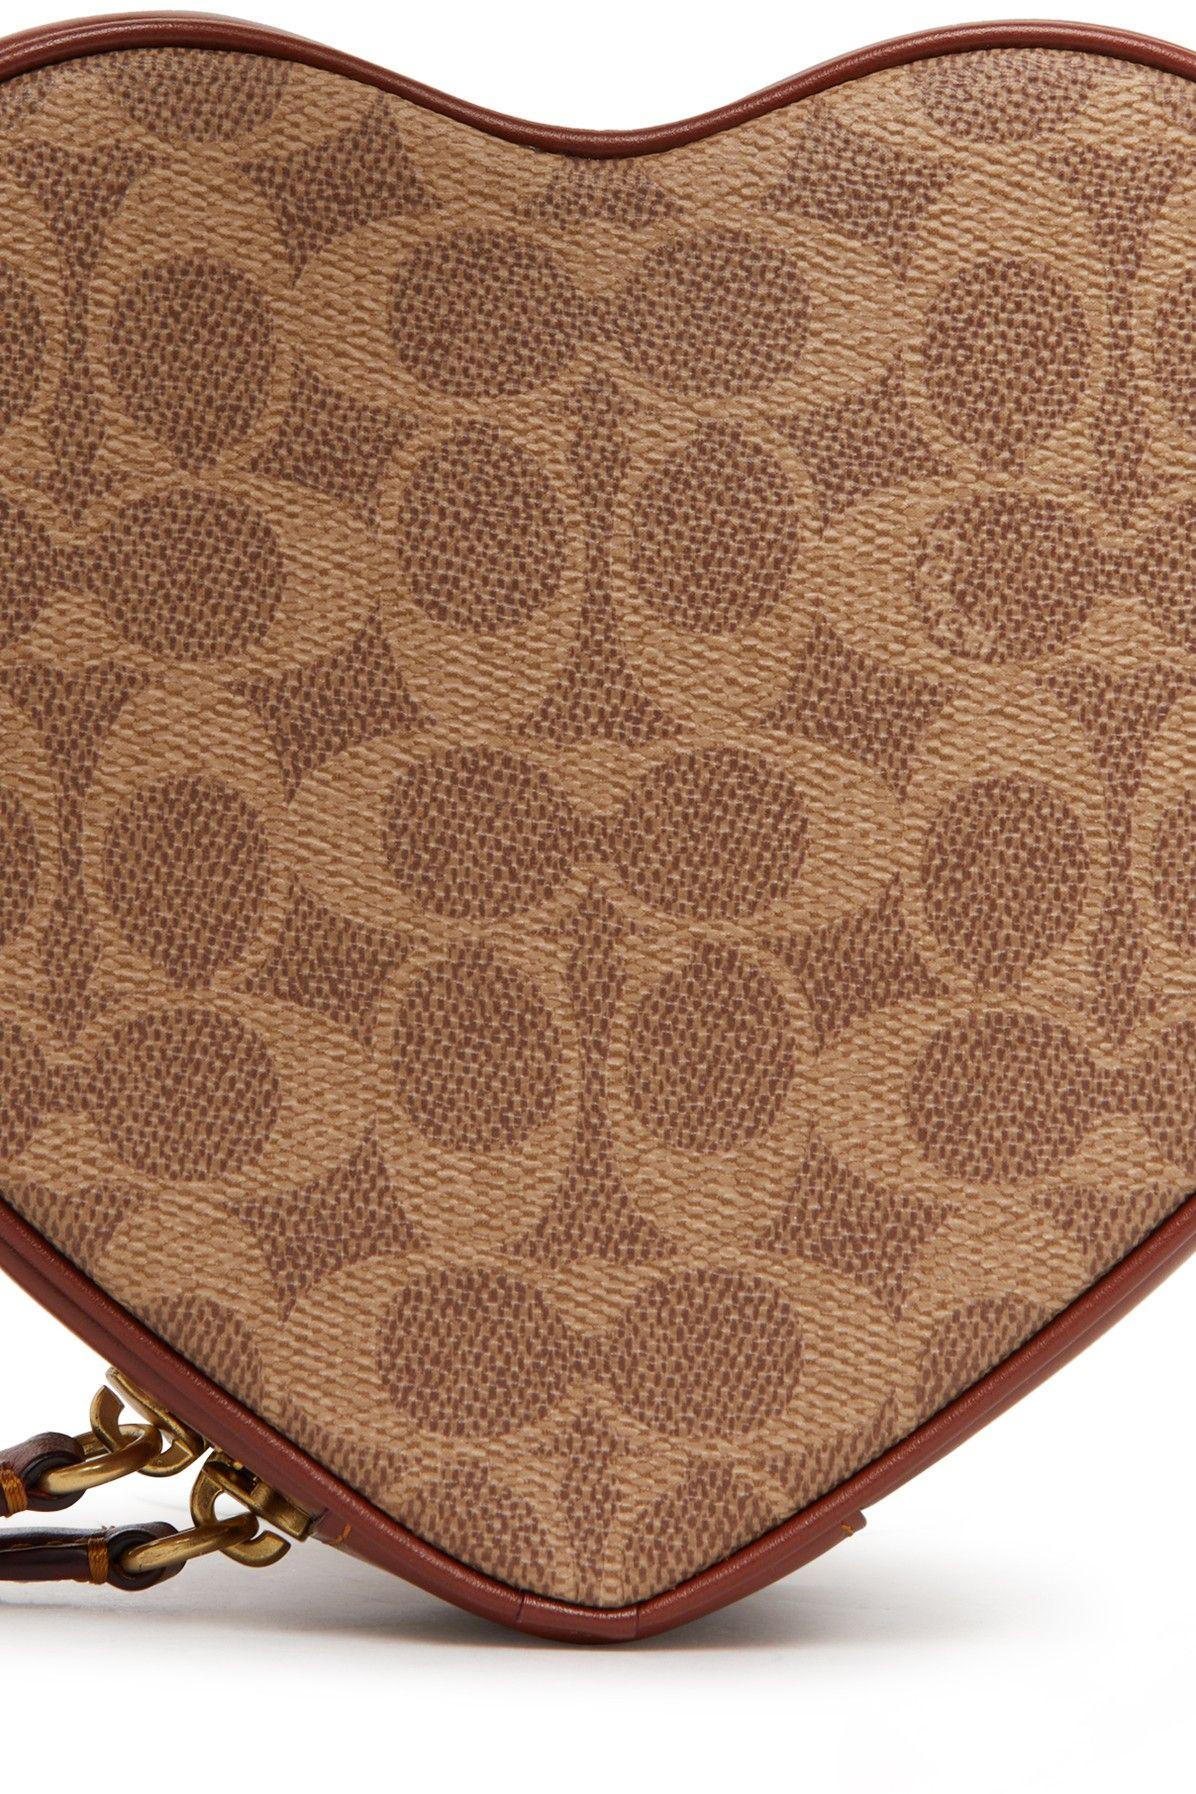 Coach Heart Crossbody Brown/Multi in Coated Canvas with Gold-tone - US